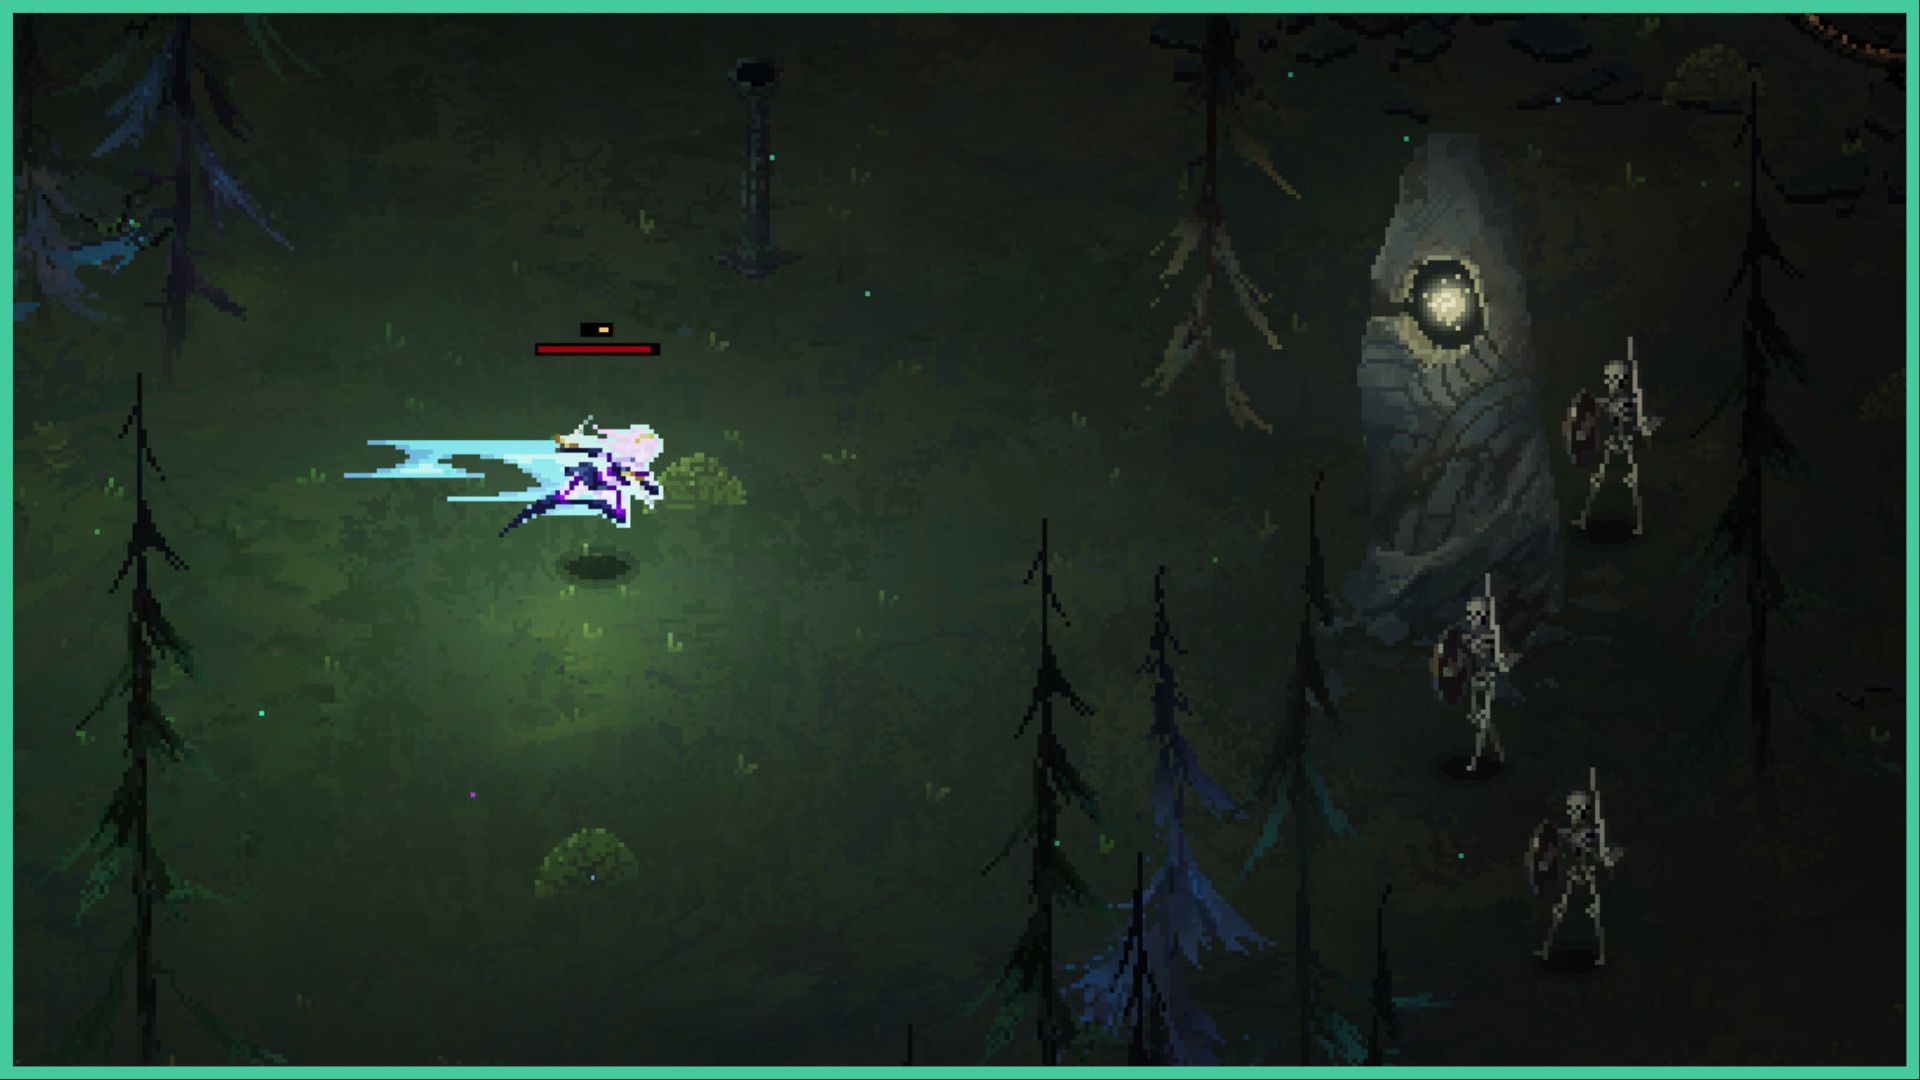 feature image for our death must die tier list, the image features a screenshot from the game of a character dashing forward in the forest as skeletons with swords and shields approach from the trees